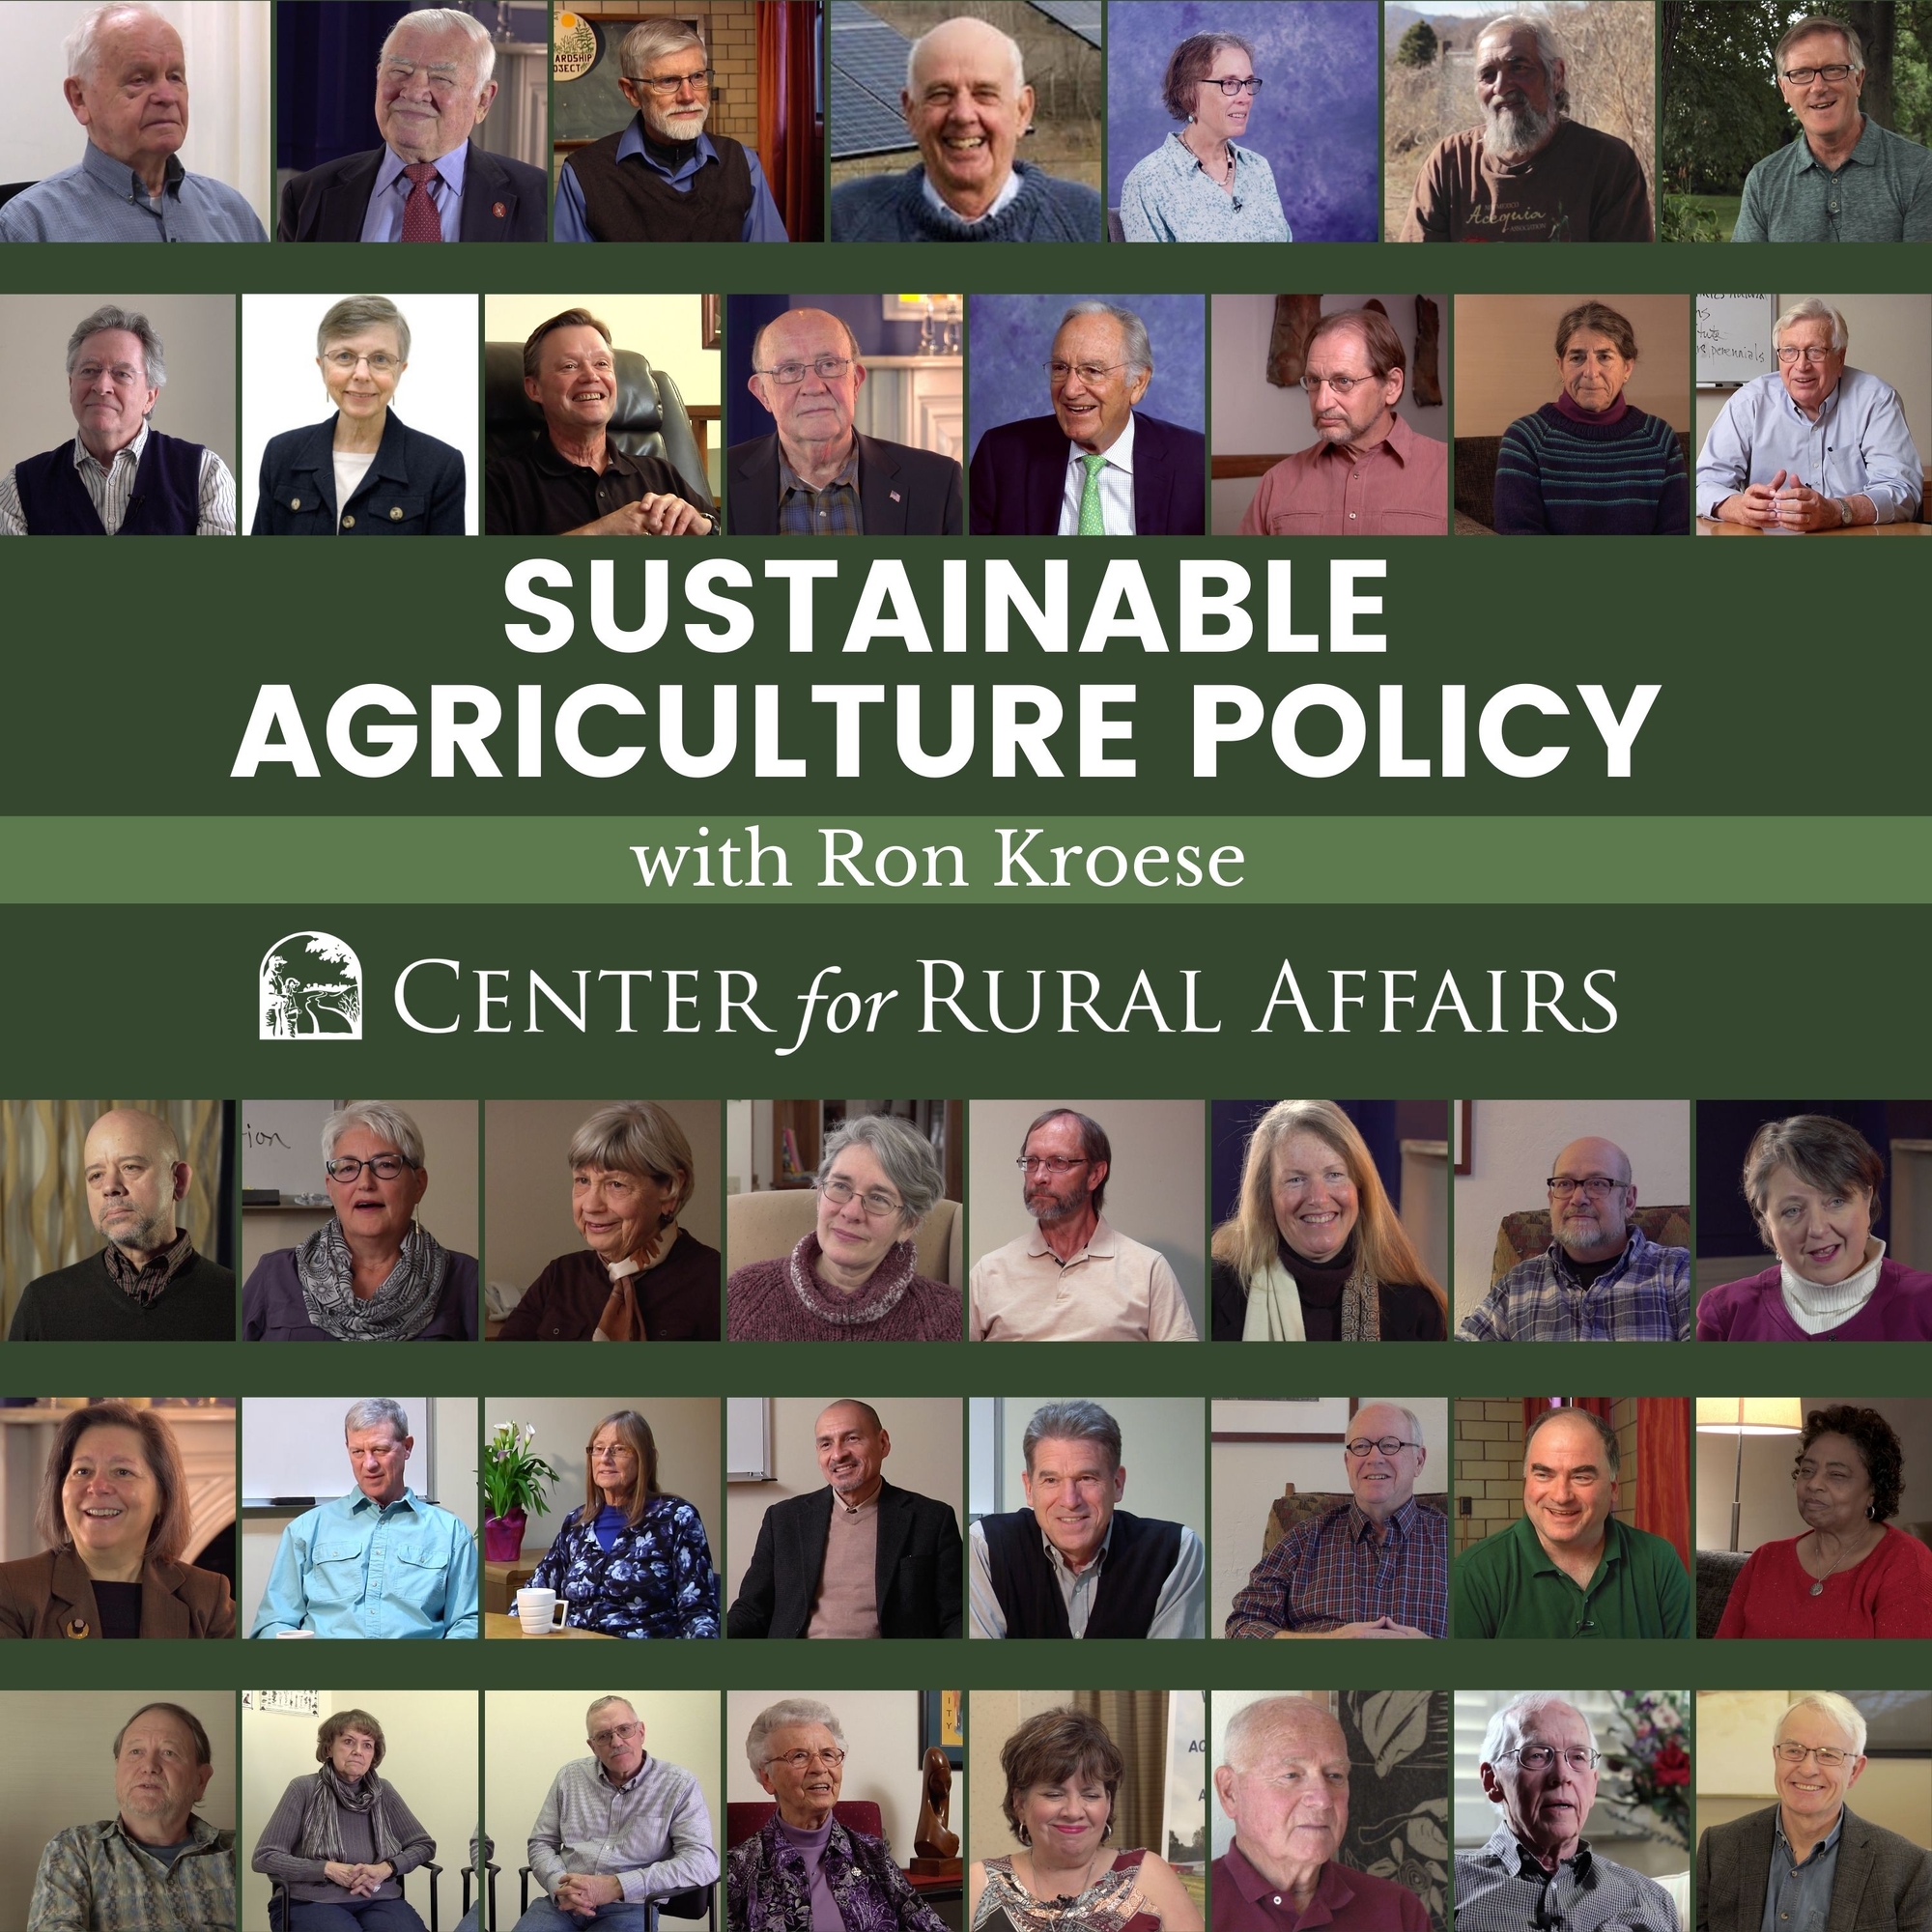 Sustainable agriculture policy advocacy